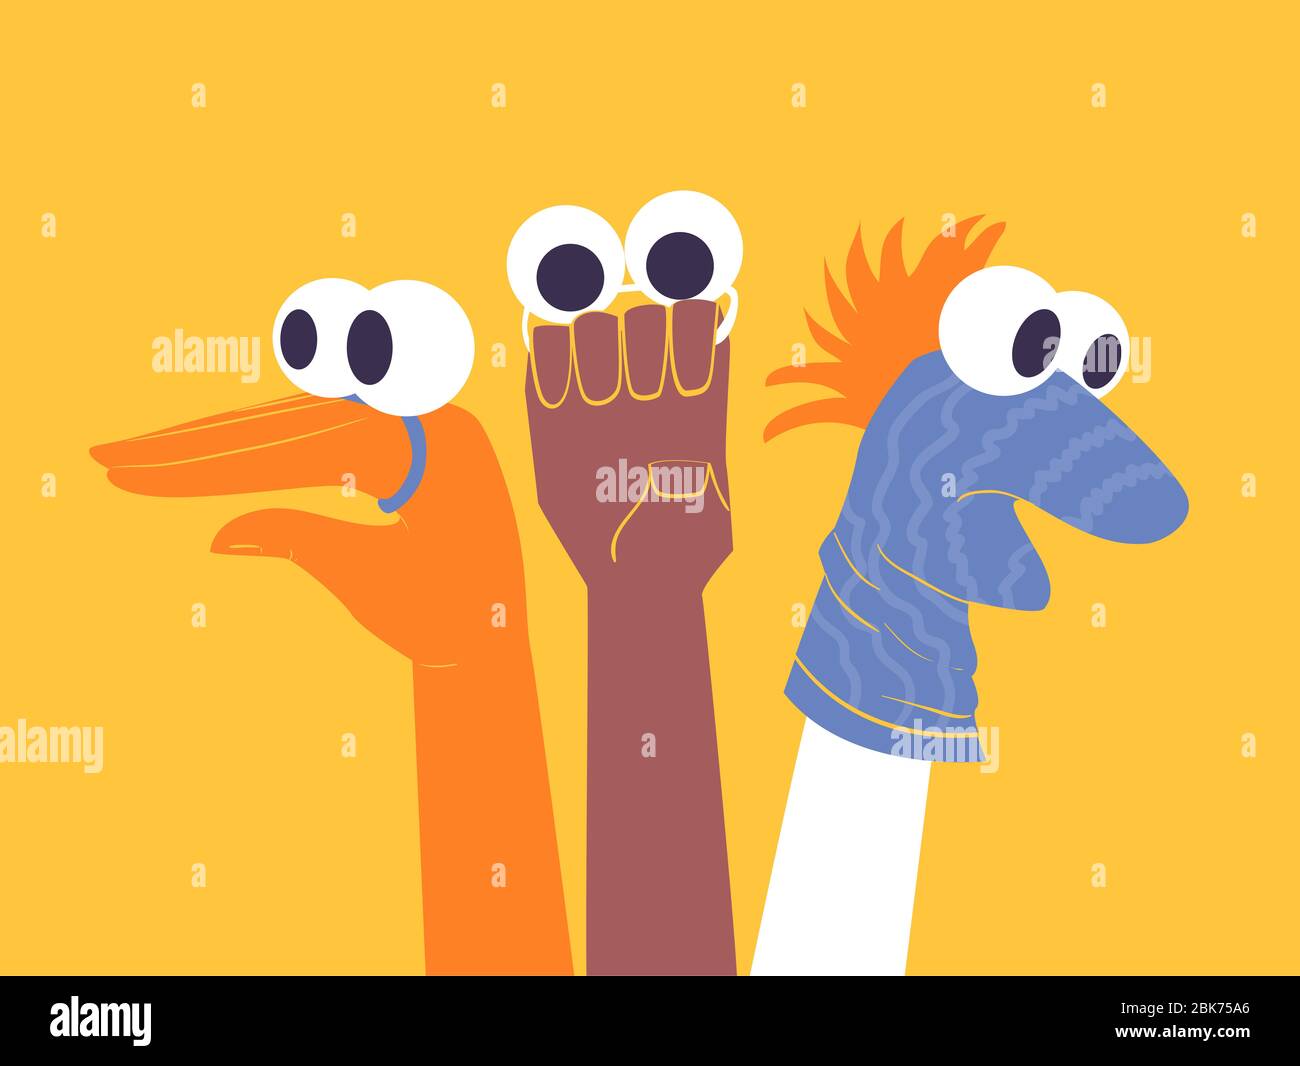 Illustration of Hands and Puppets, One Being a Sock Puppet in a Basic  Workshop Stock Photo - Alamy